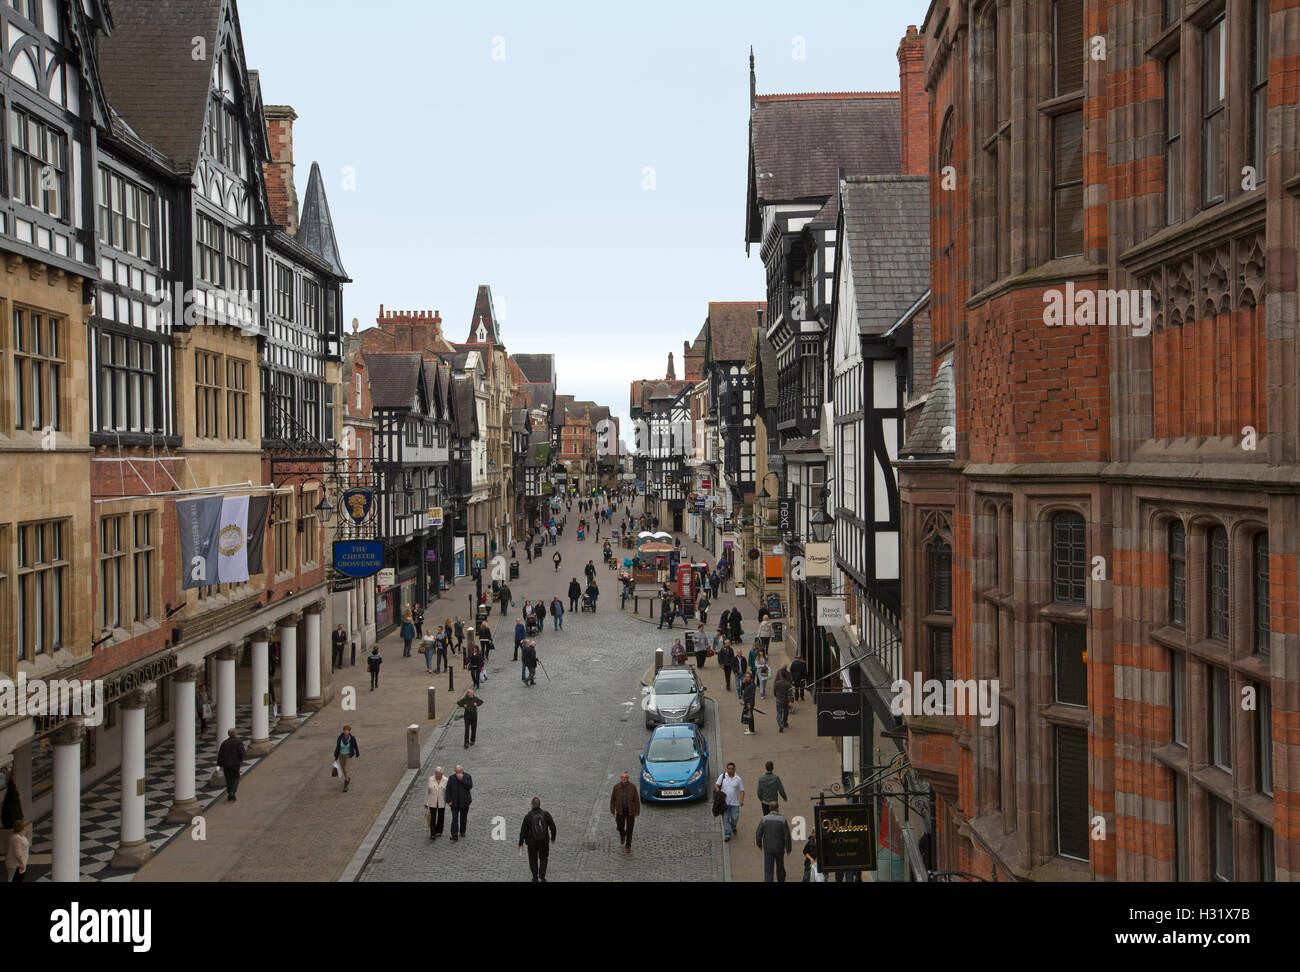 Eastgate street pedestrian mall in medieval city of Chester with people wandering between rows of historic buildings, in England Stock Photo